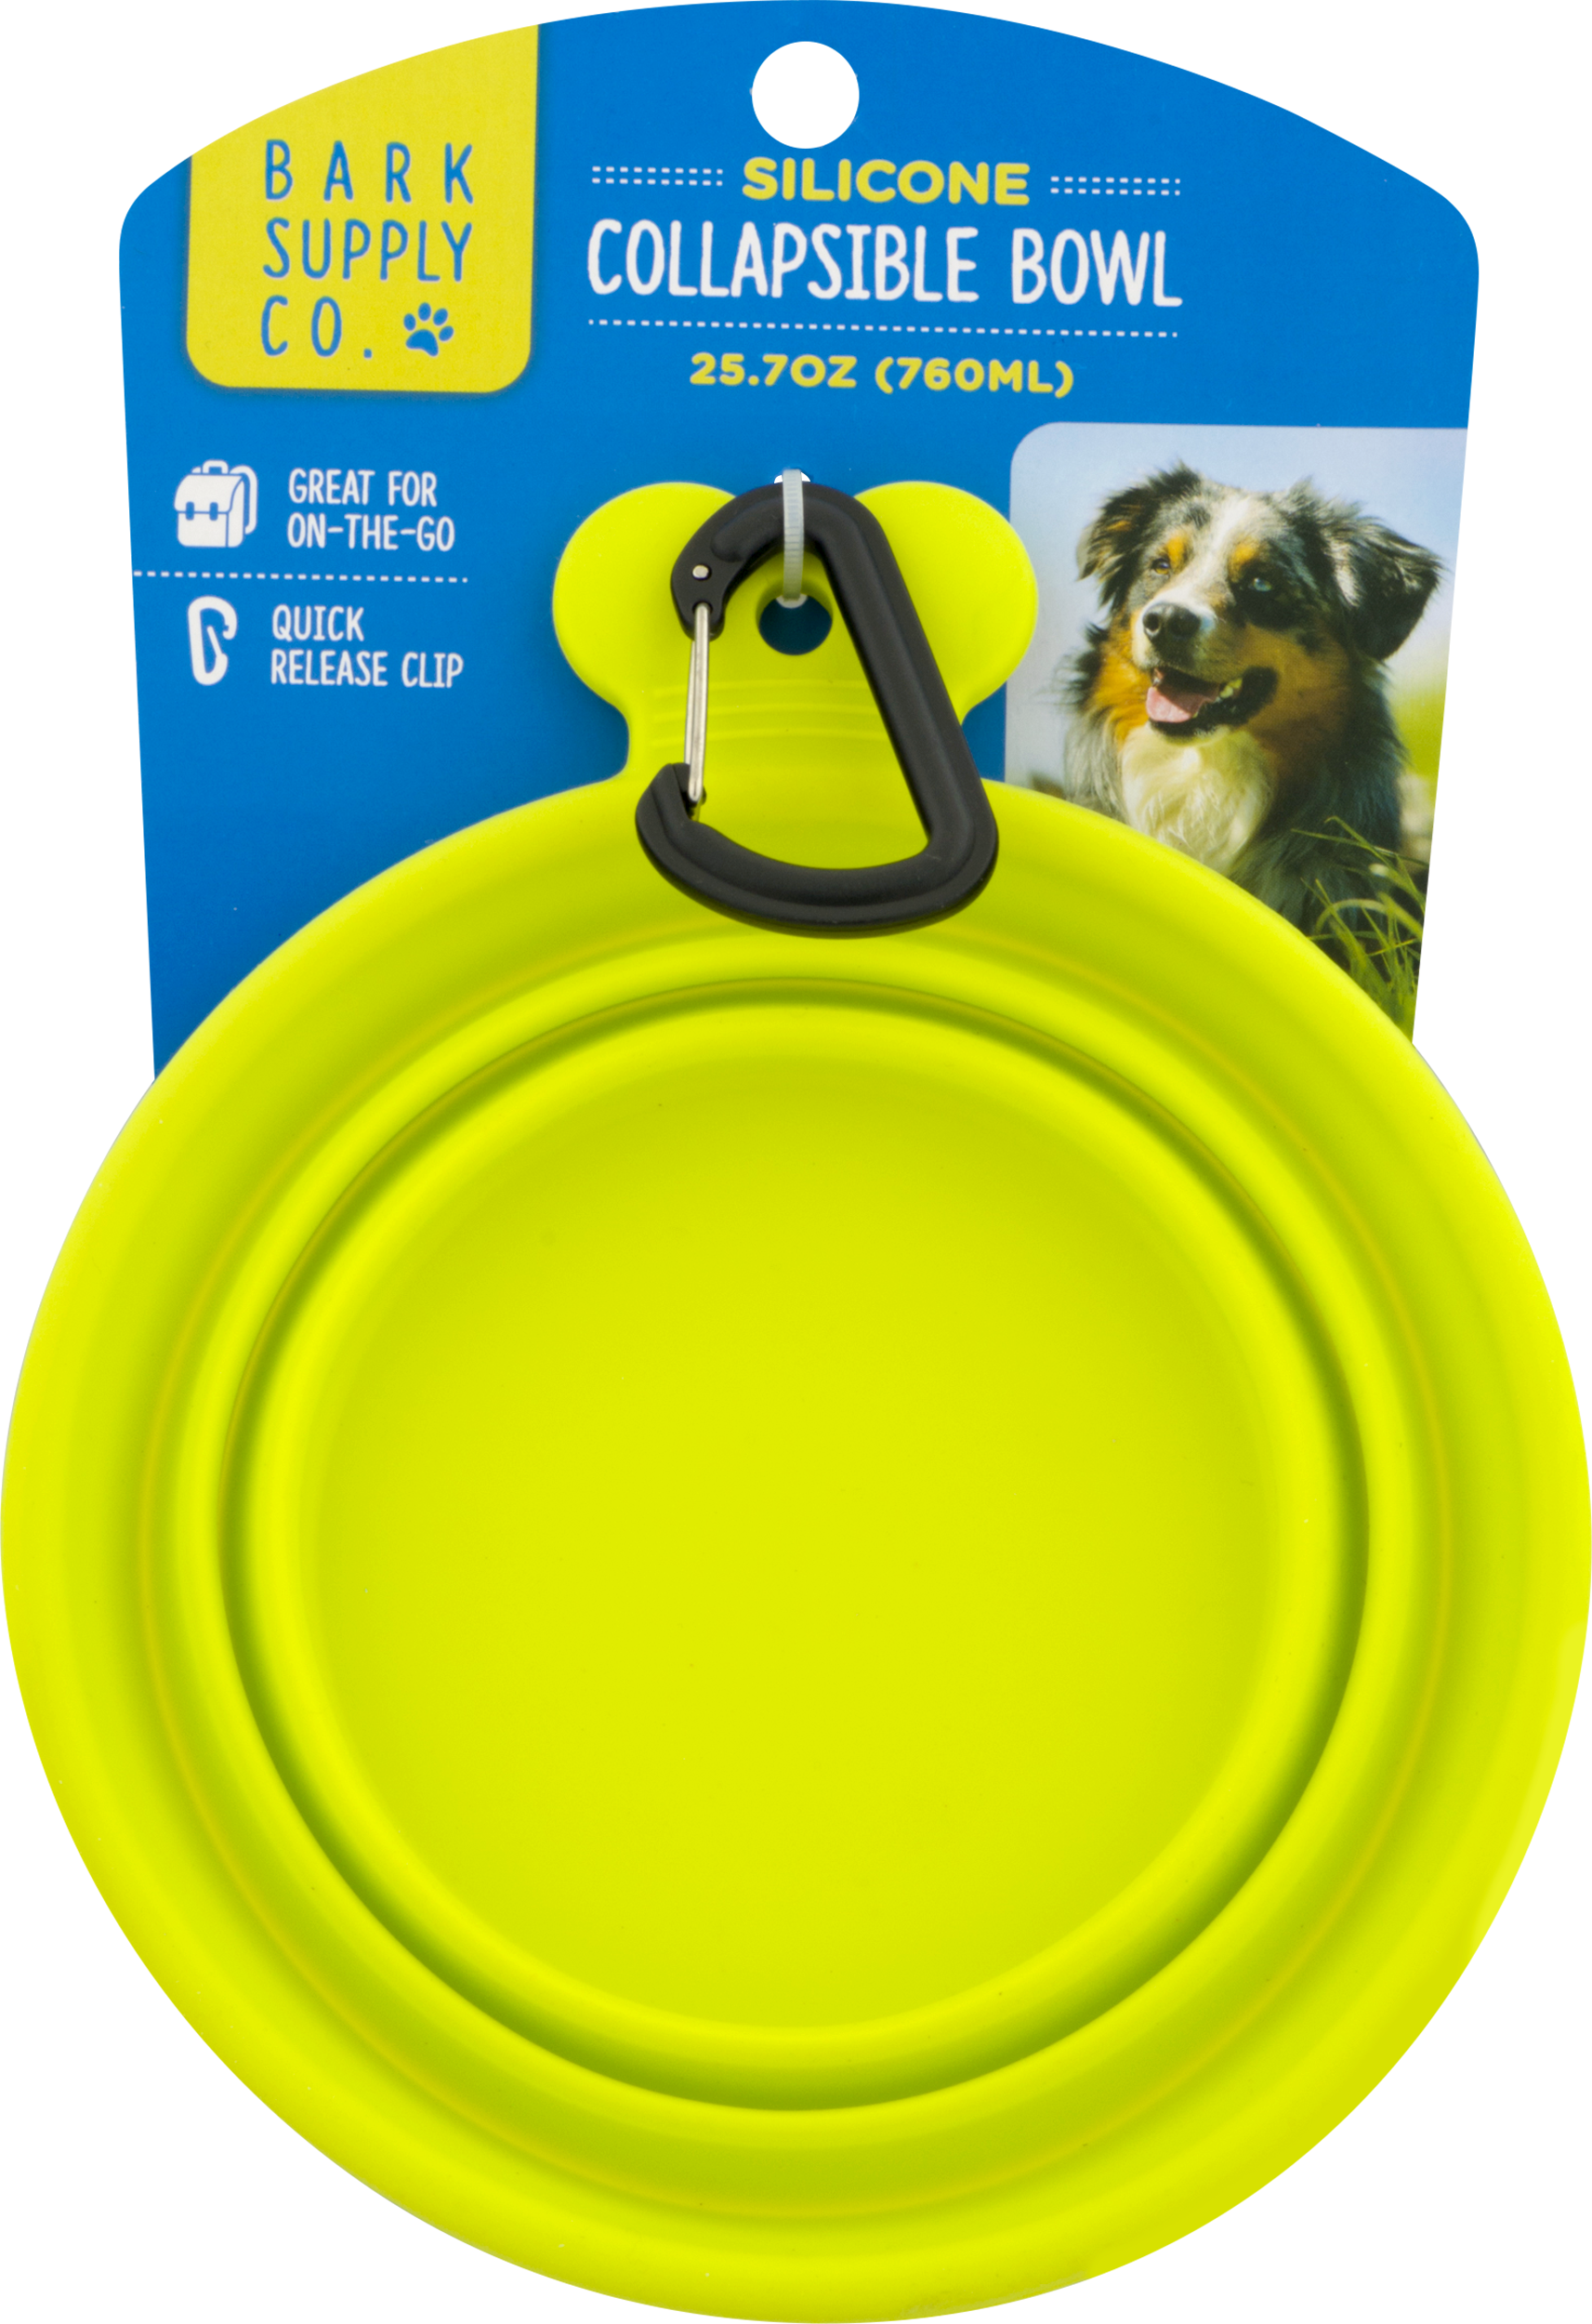 Collapsible Dog Bowl, Best Brands, Large Dog Bowl, (1713x2500)